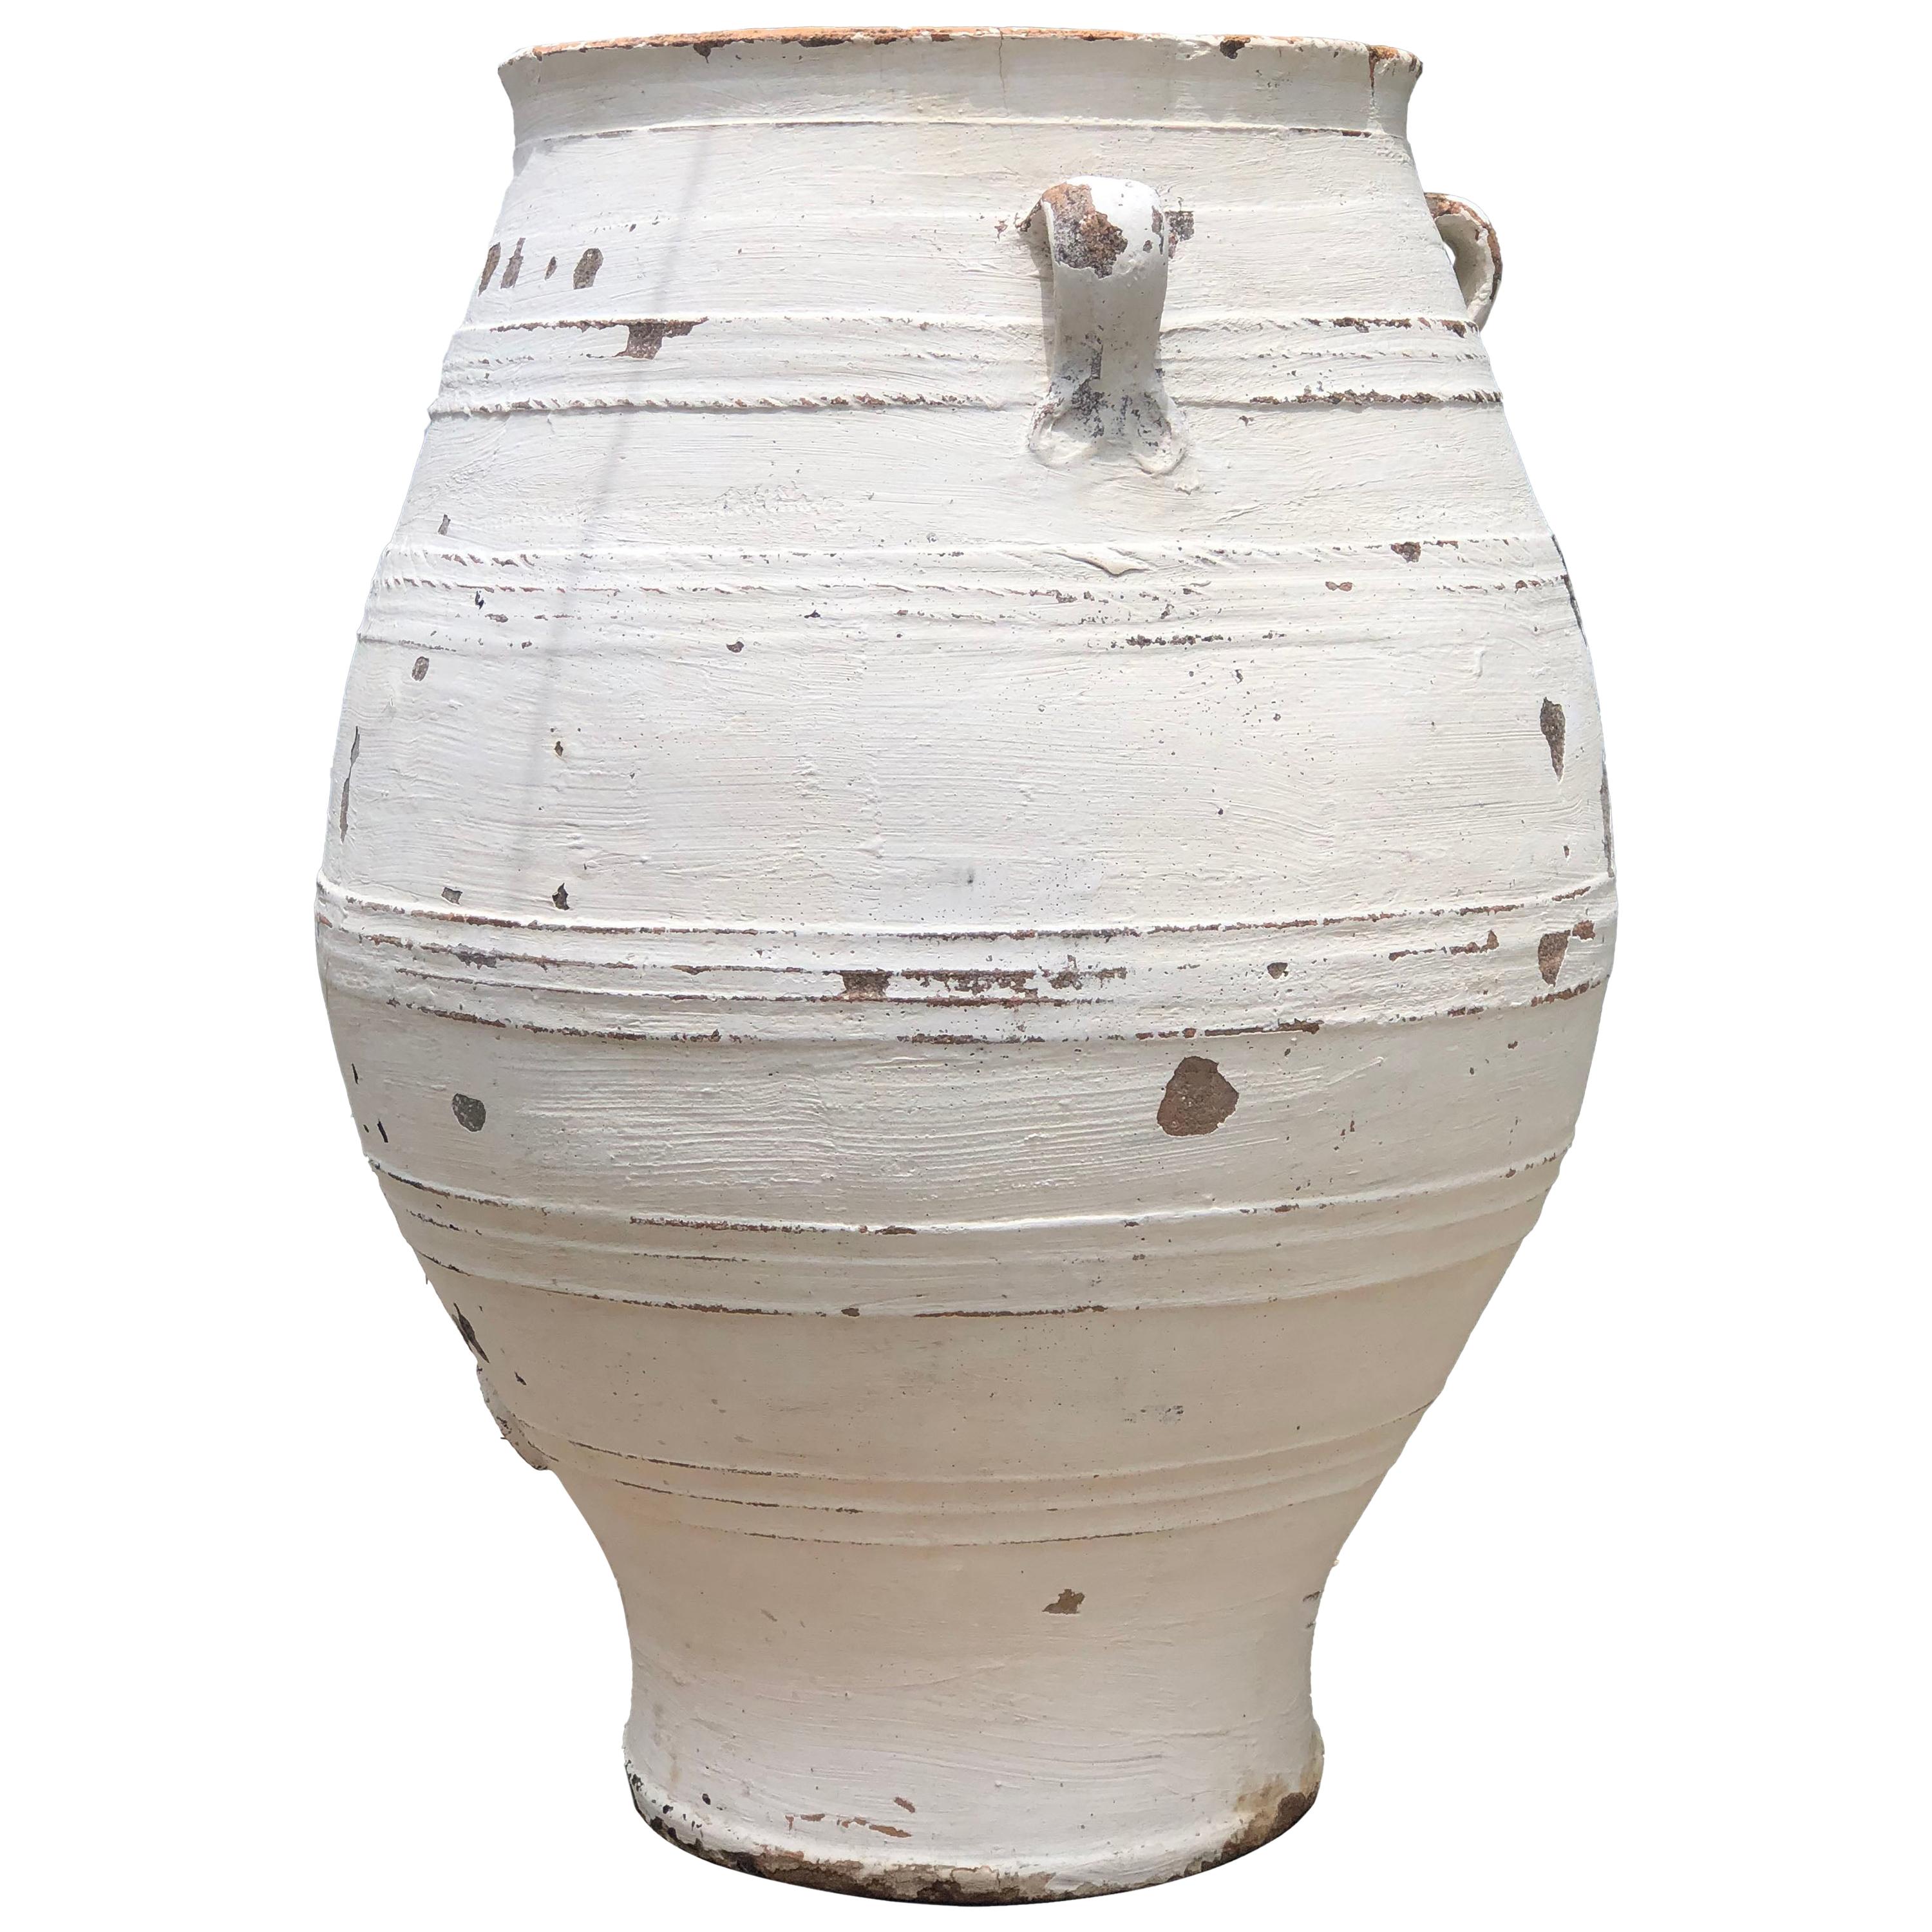 Antique Terracotta Whitewashed Olive Pot with Original Patina